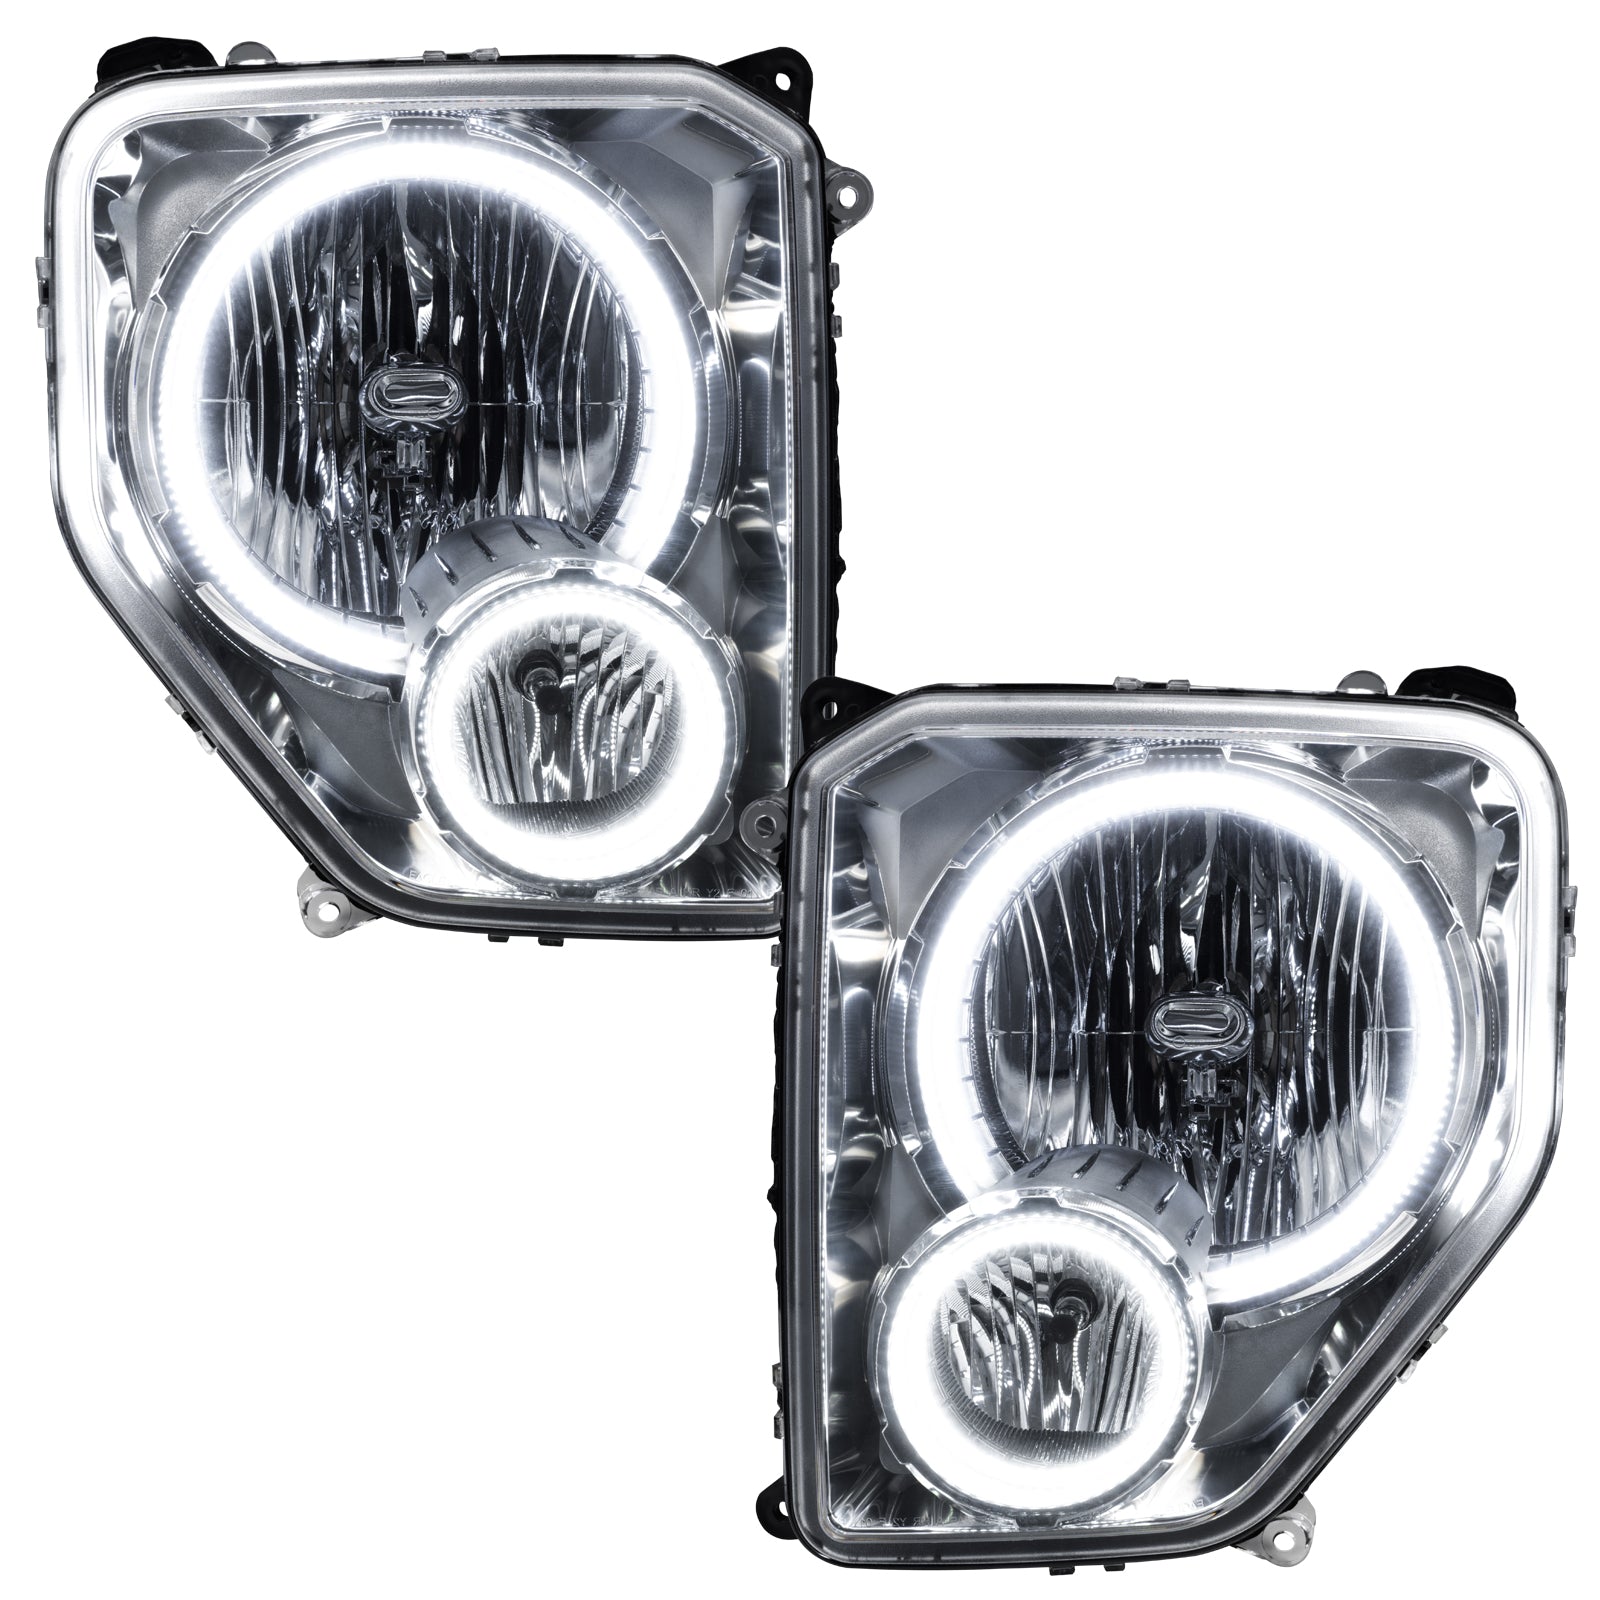 Oracle Lighting 2008-2012 Jeep Liberty Pre-Assembled LED Halo Headlights 7075-001